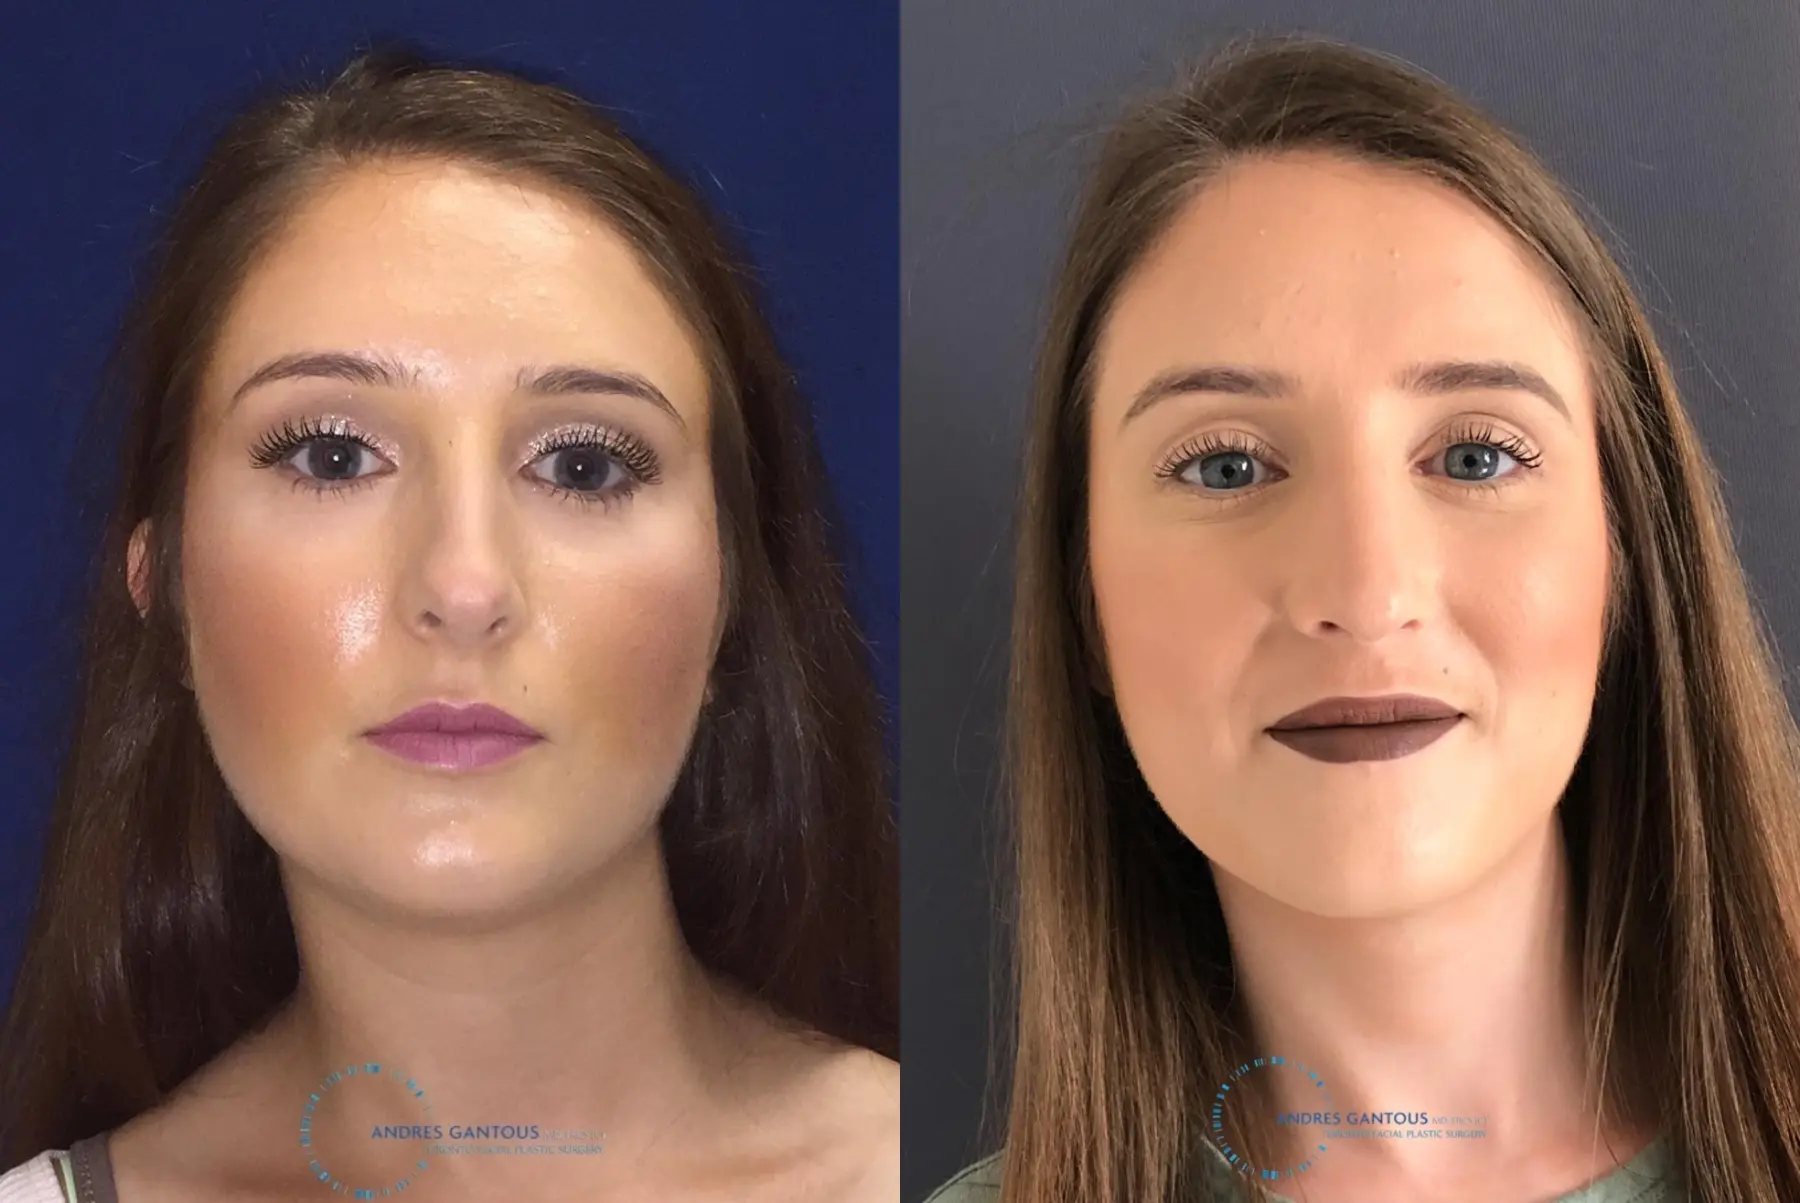 Rhinoplasty: Patient 1 - Before and After 1